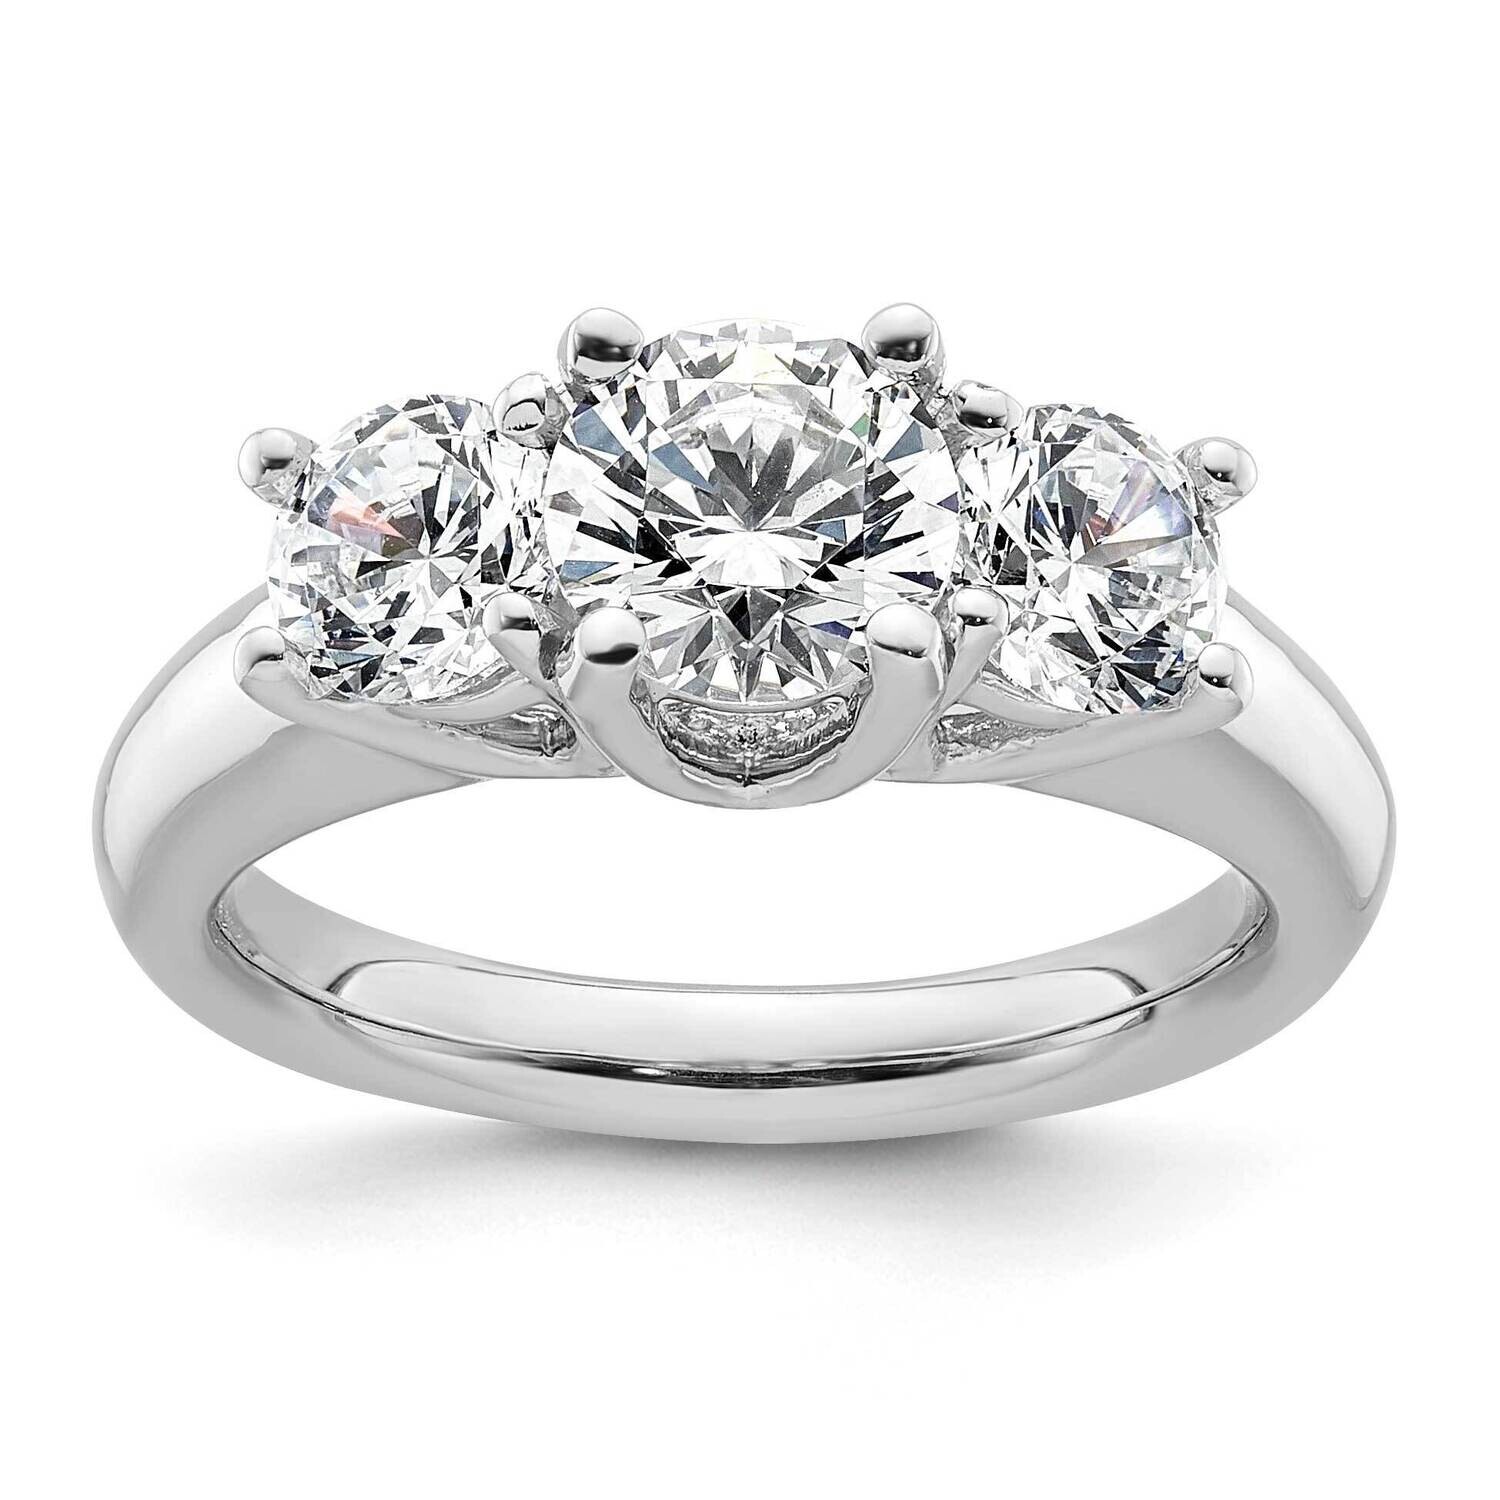 3-Stone Holds 1.25 Carat 7.00mm Round Center 2-5.5mm Round Sides Engagement Ring Mounting 14k White Gold RM2946E-125-CWAA